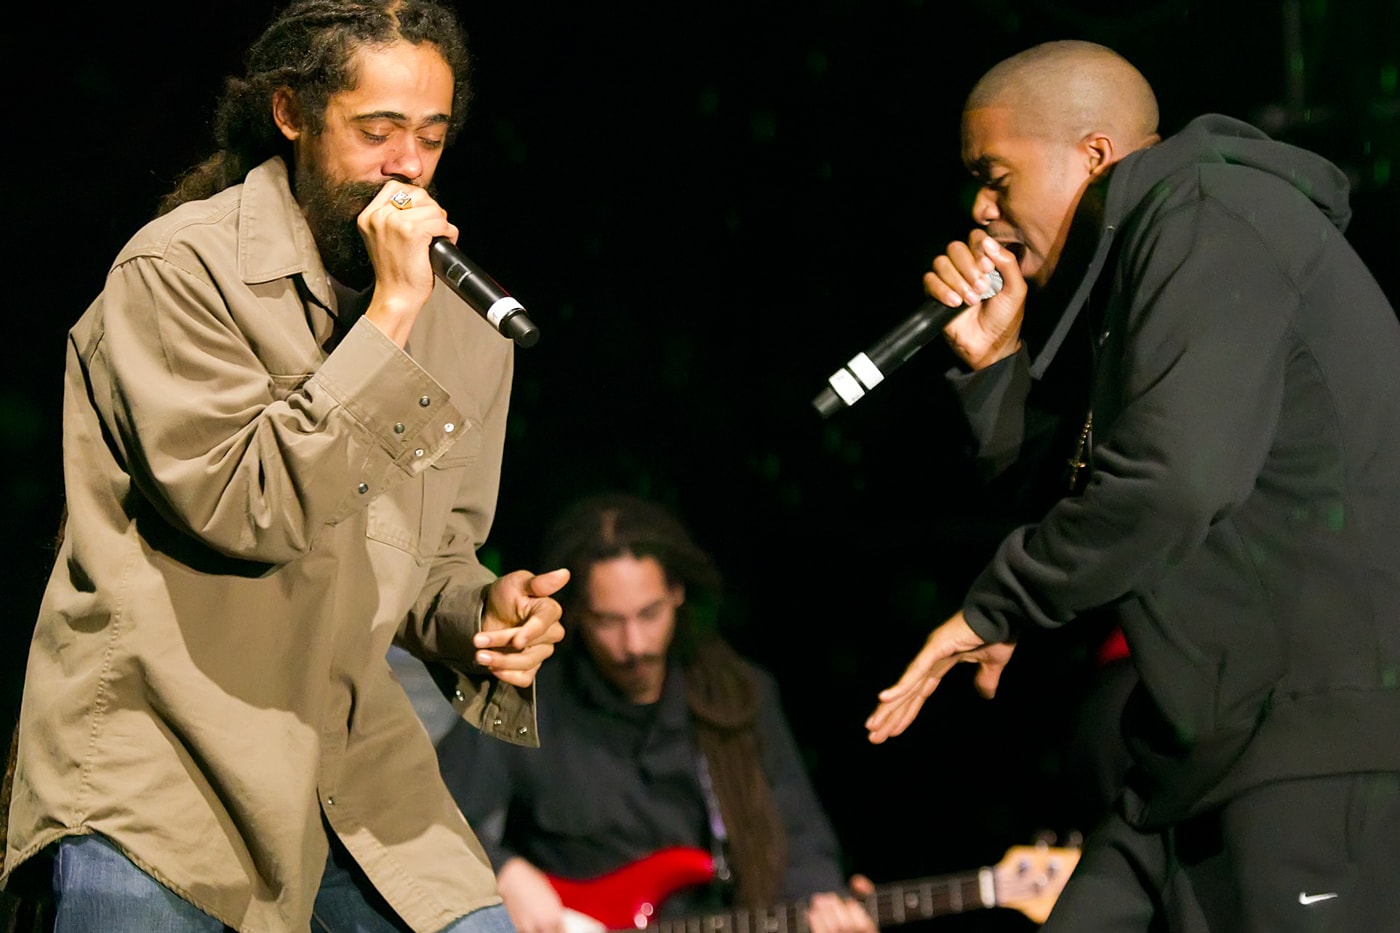 Damian Marley and Nas - Patience #damianmarley #nas #patience #damian_